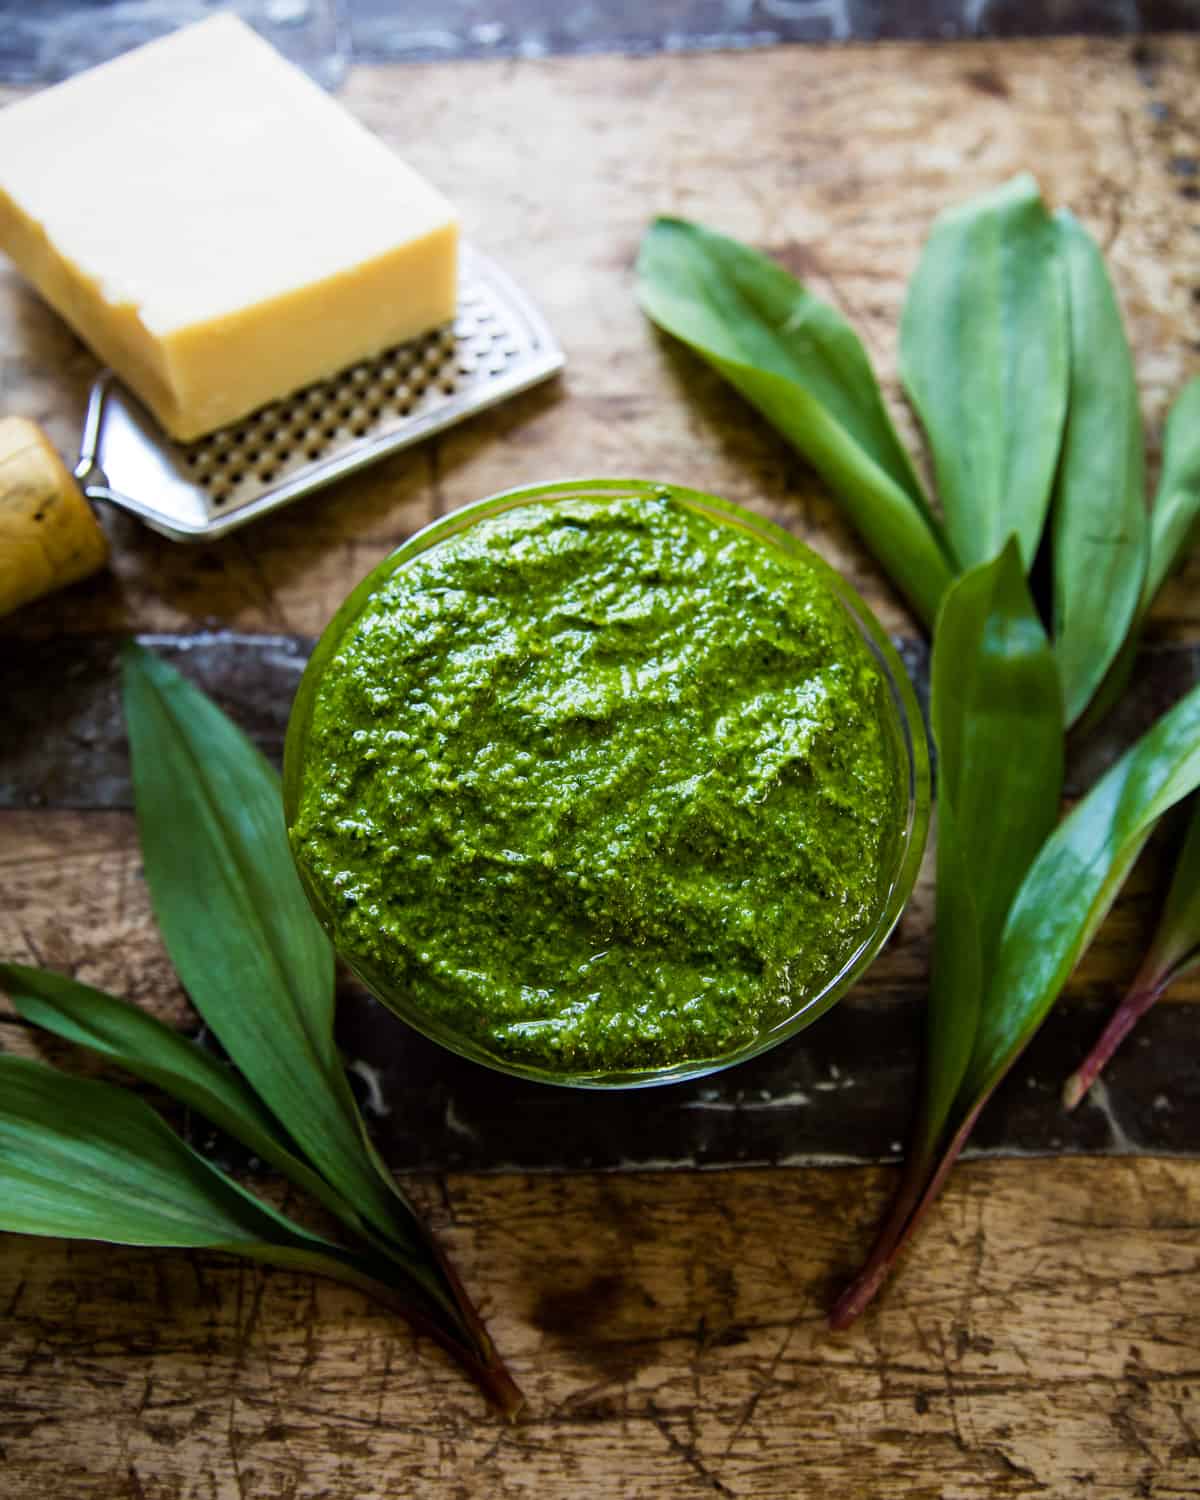 ramp pesto on a wooden table with ramp leaves and parmesan cheese